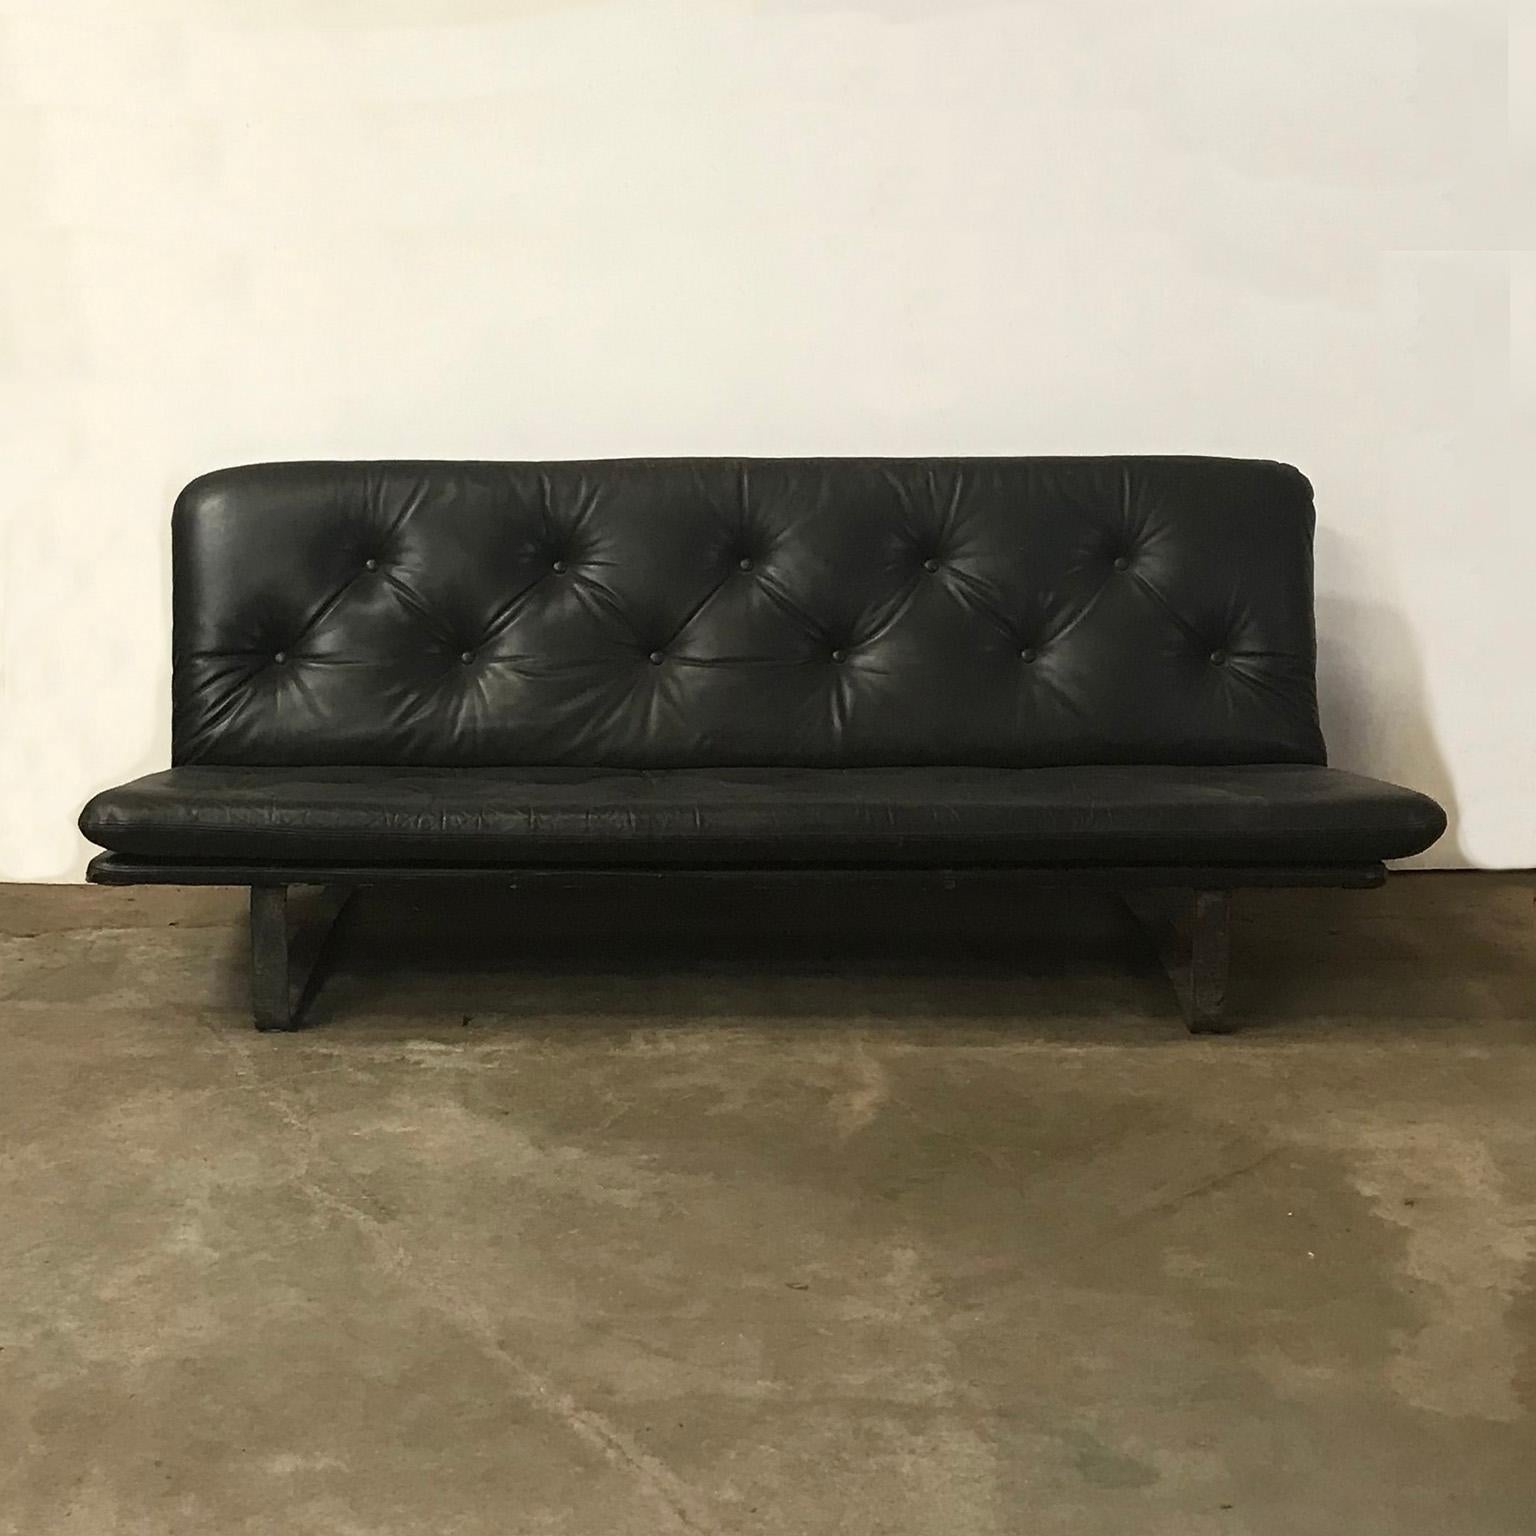 Original, early, stronger manufactured as nowadays, Kho Liang Ie 3-seat padded sofa in dark brown (soft) leather and Black base. The sofa has a great look because of the traces of wear of the leather that gives it a strong character. There is a long